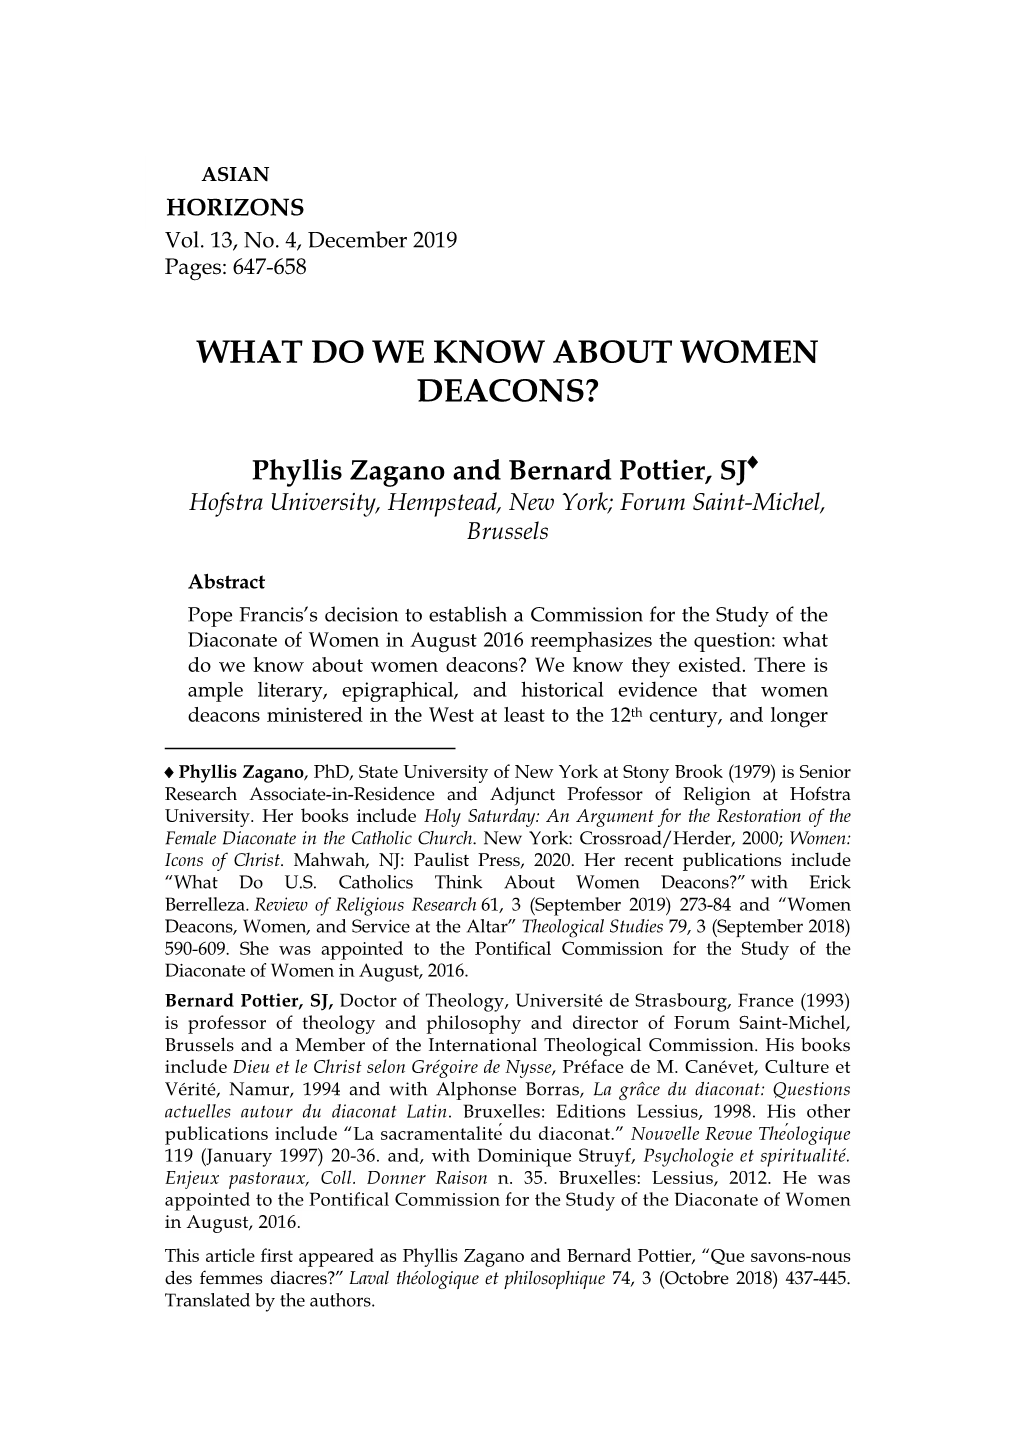 What Do We Know About Women Deacons?